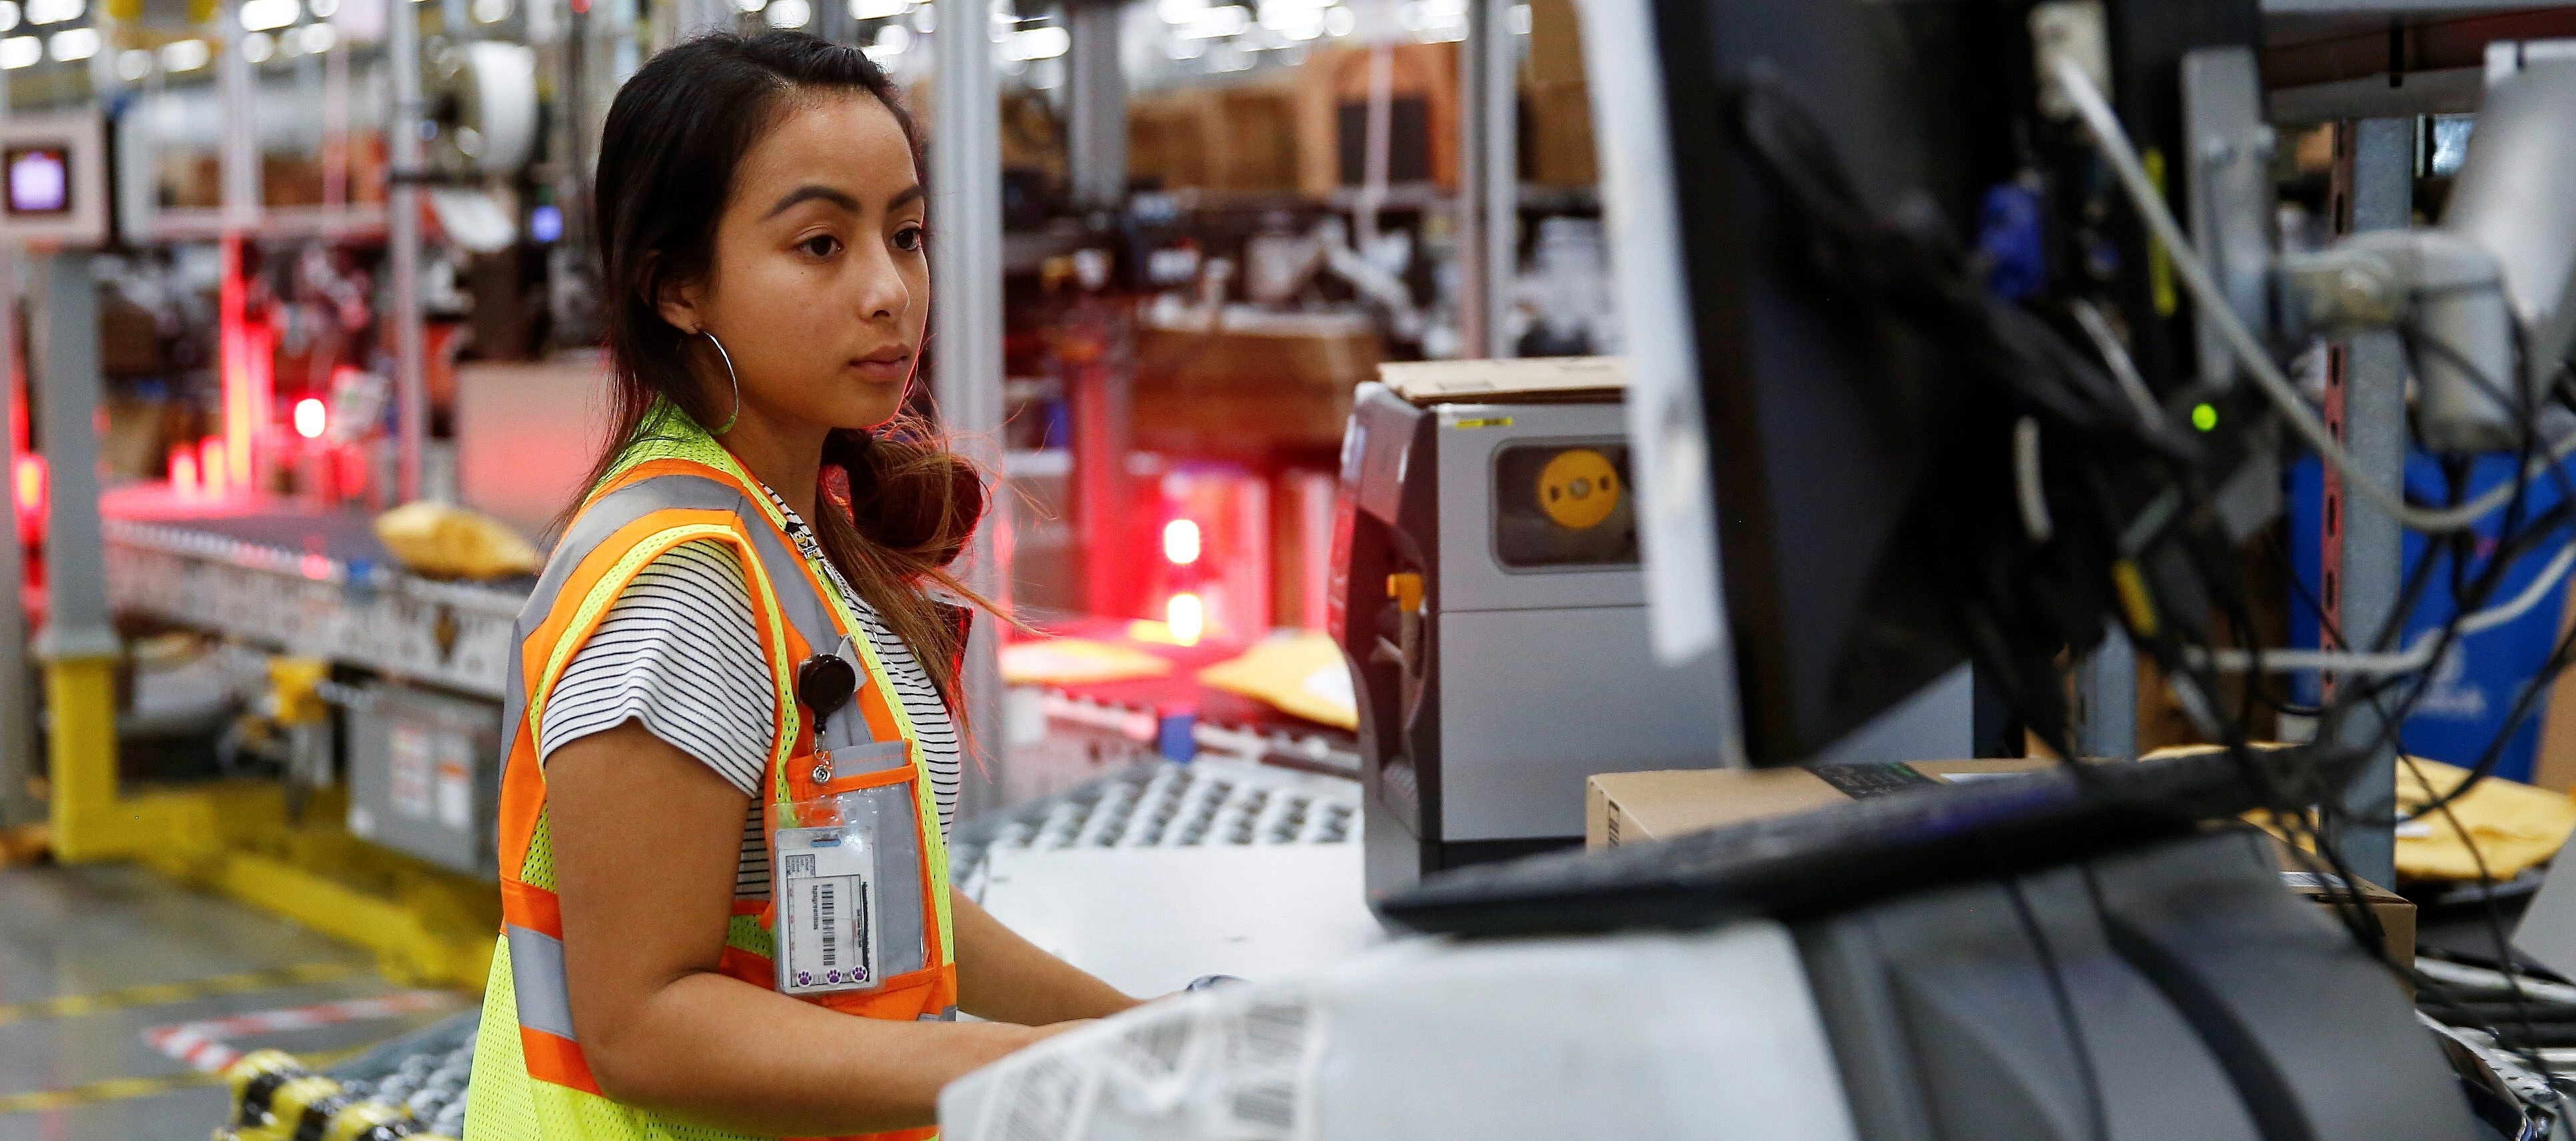 Amazon employee works on processing packages in Kent, Washington DC, REUTERS, 